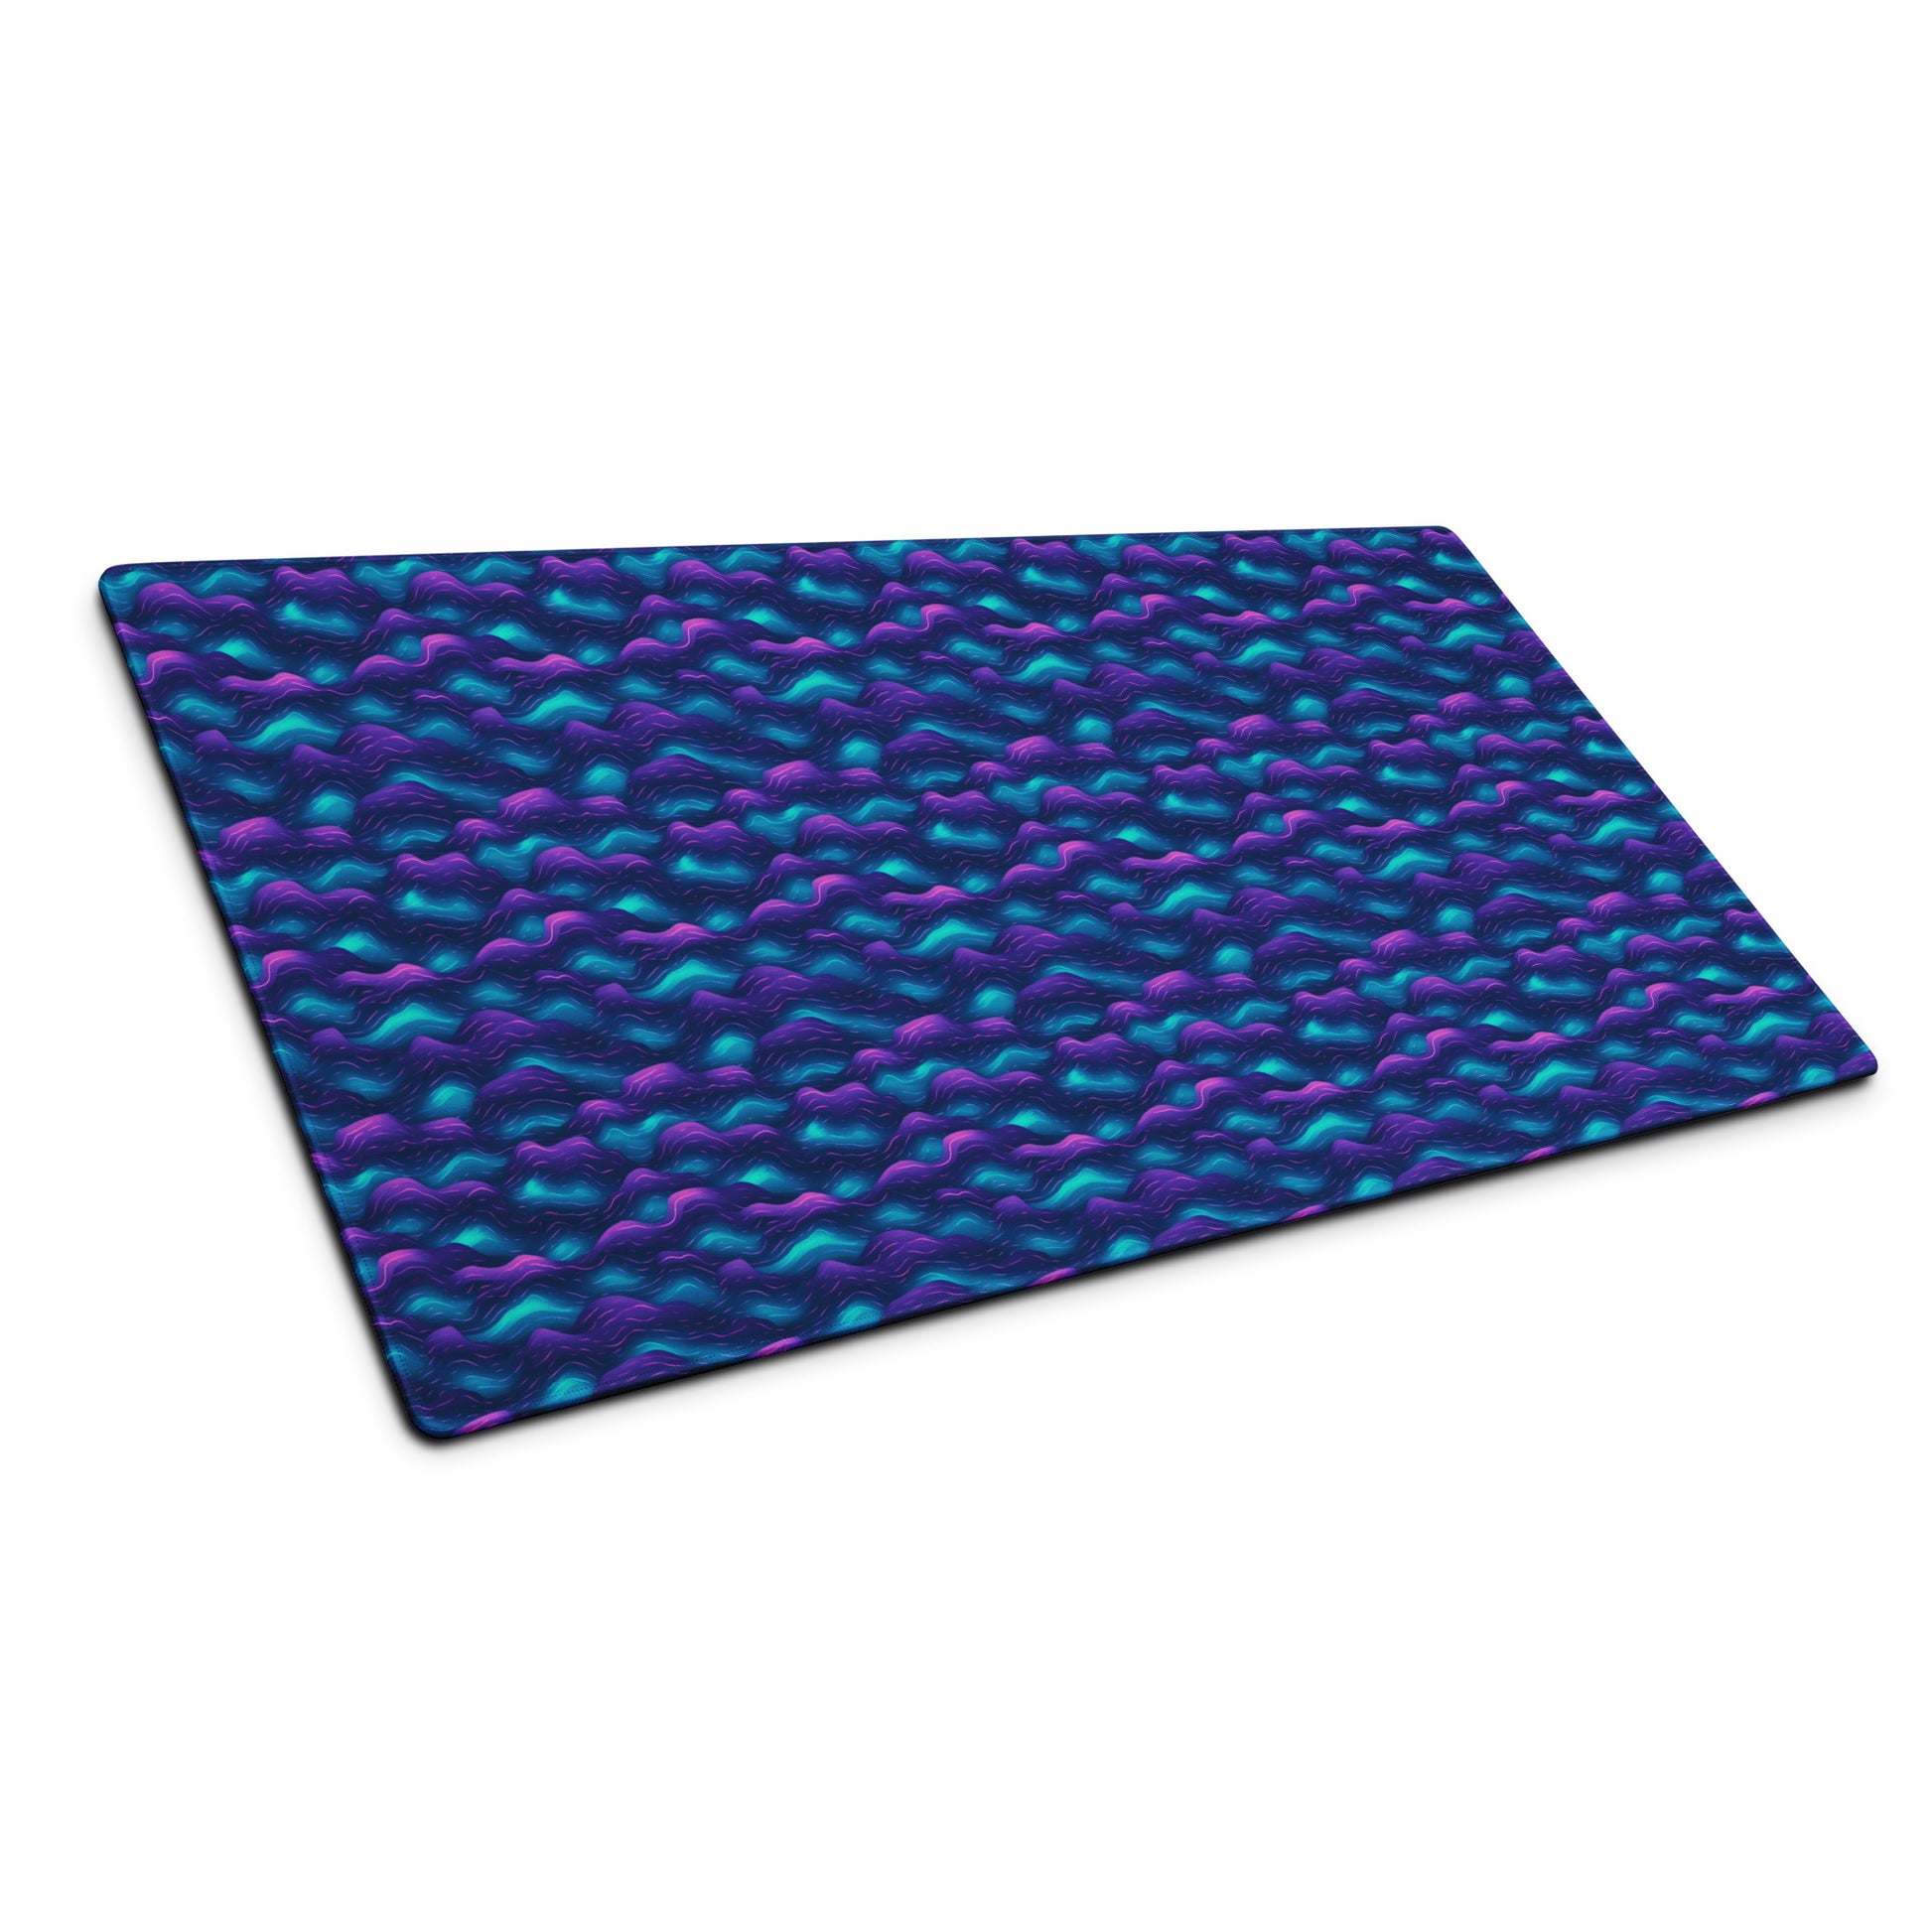 A 36" x 18" desk pad with blue and purple wave pattern sitting at an angle.